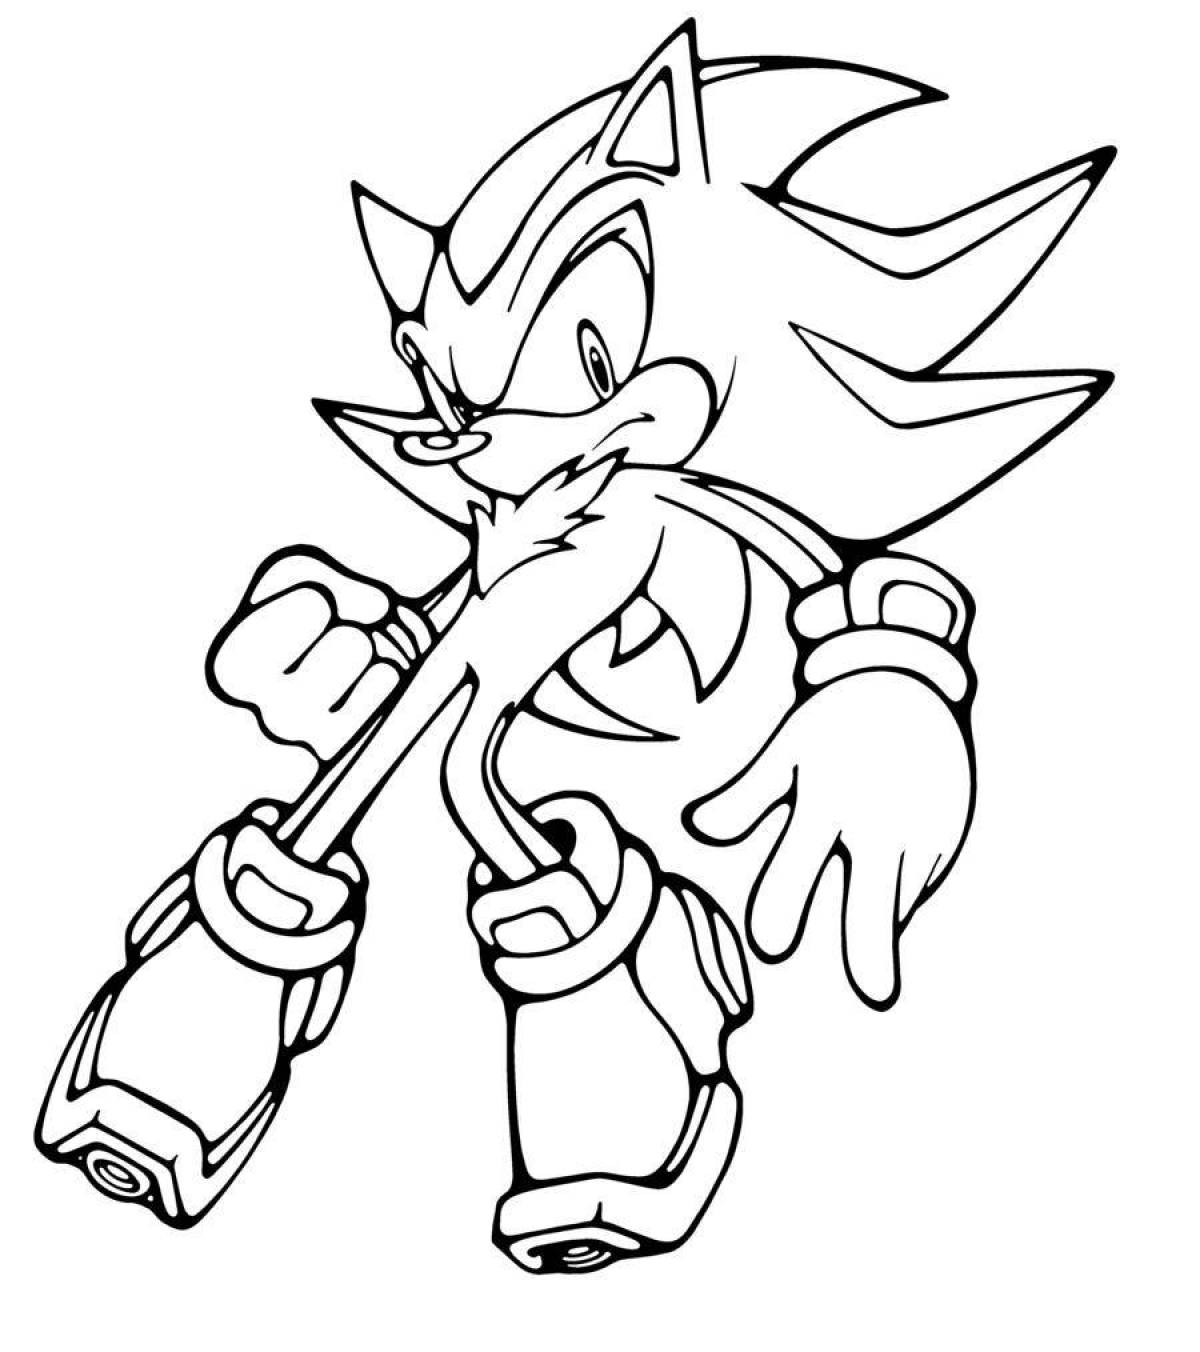 Attraction infinite sonic coloring page